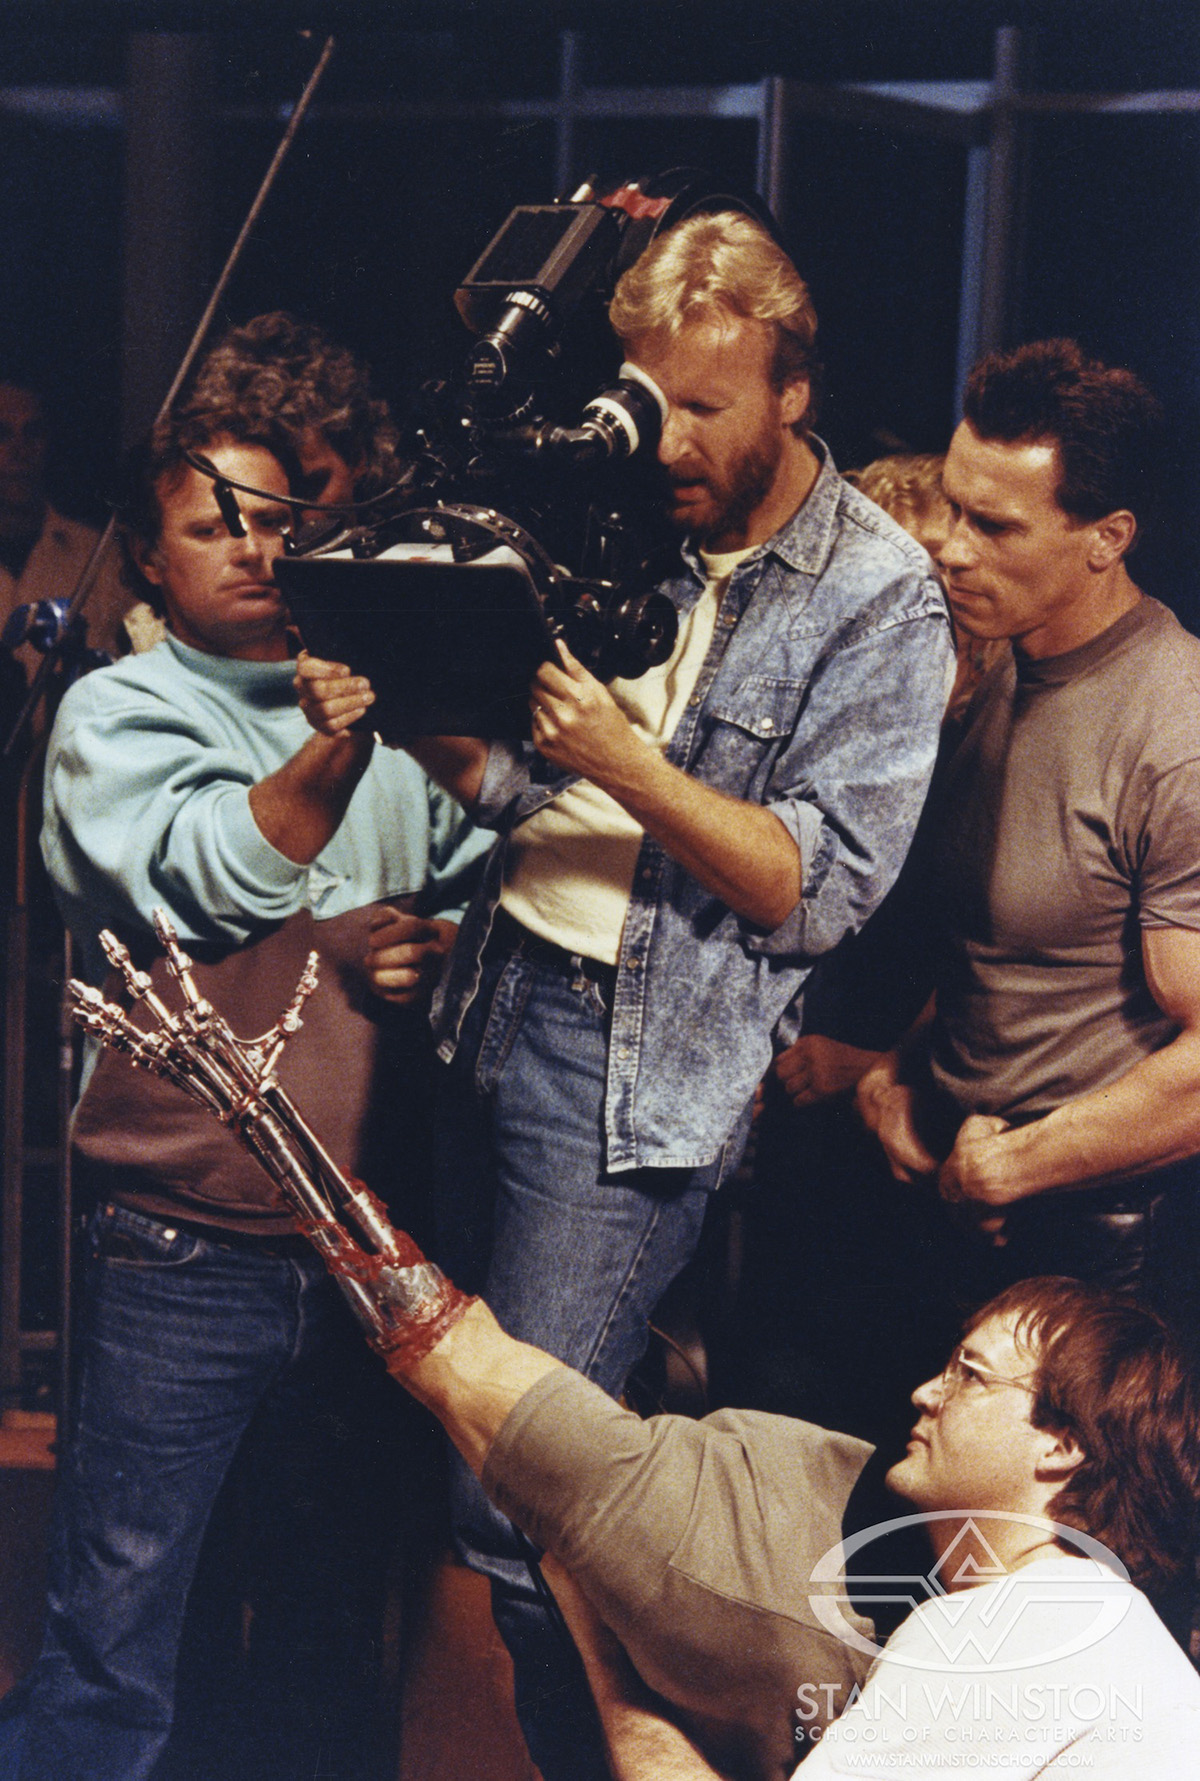 Filming a practical make-up effects scene